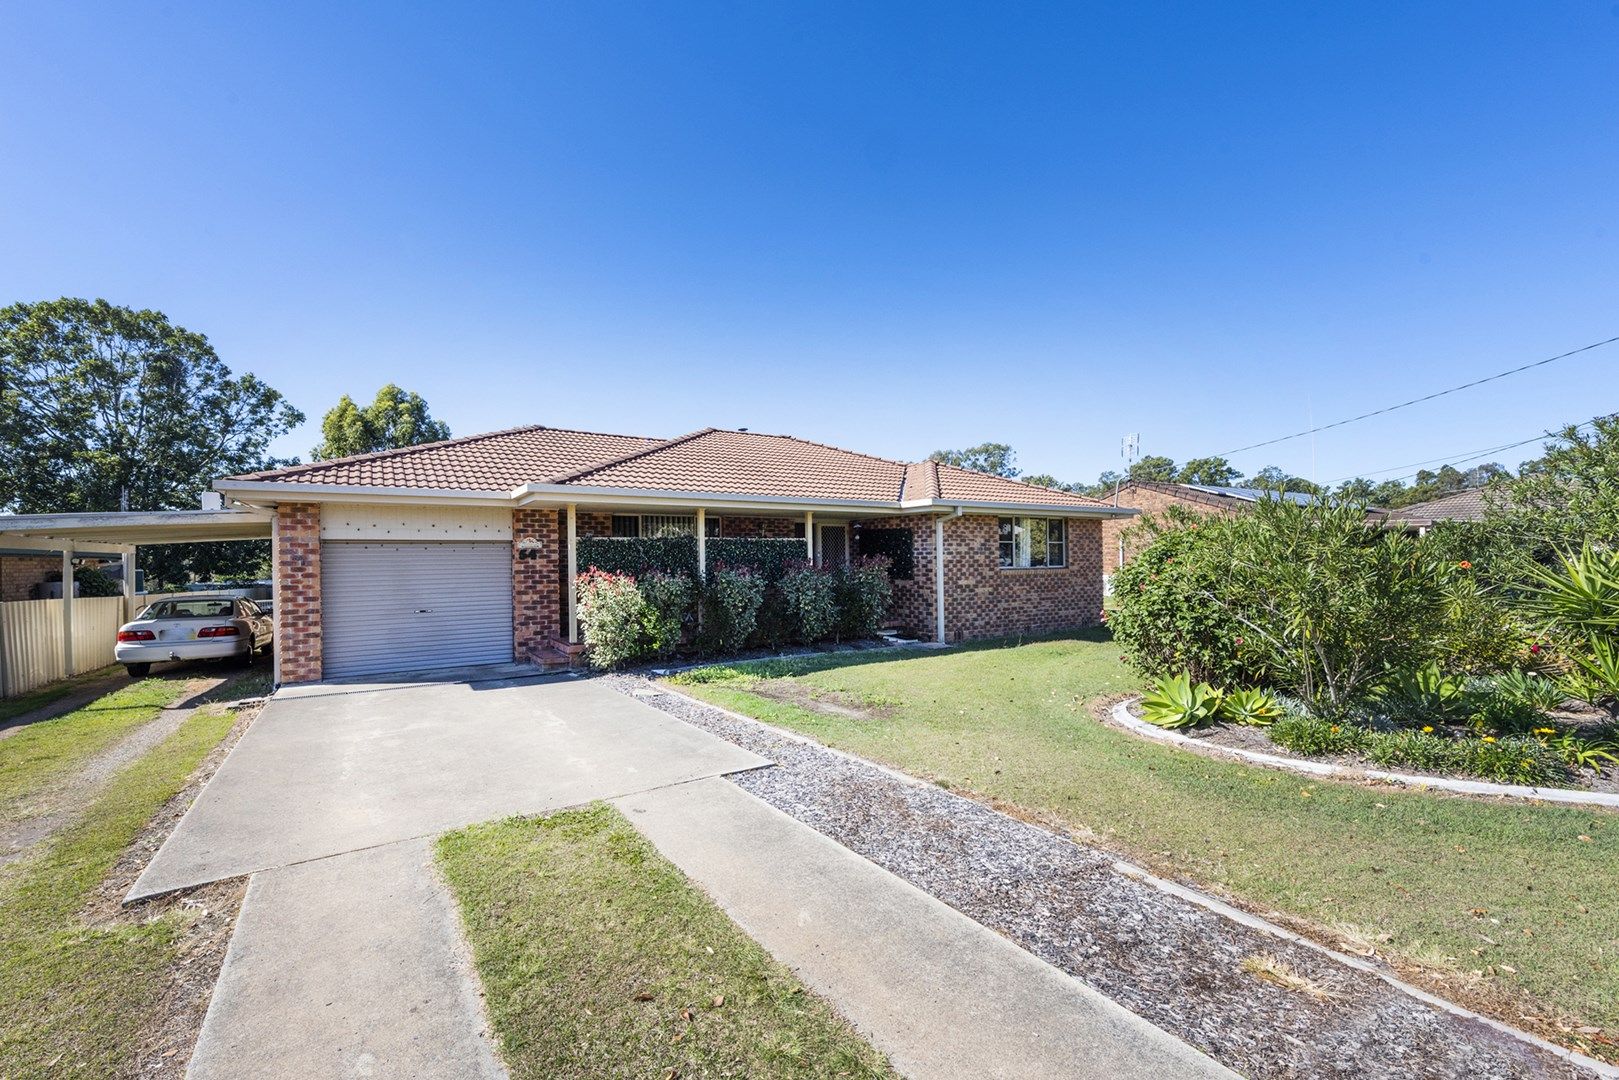 54 Lakkari Street, Coutts Crossing NSW 2460, Image 0